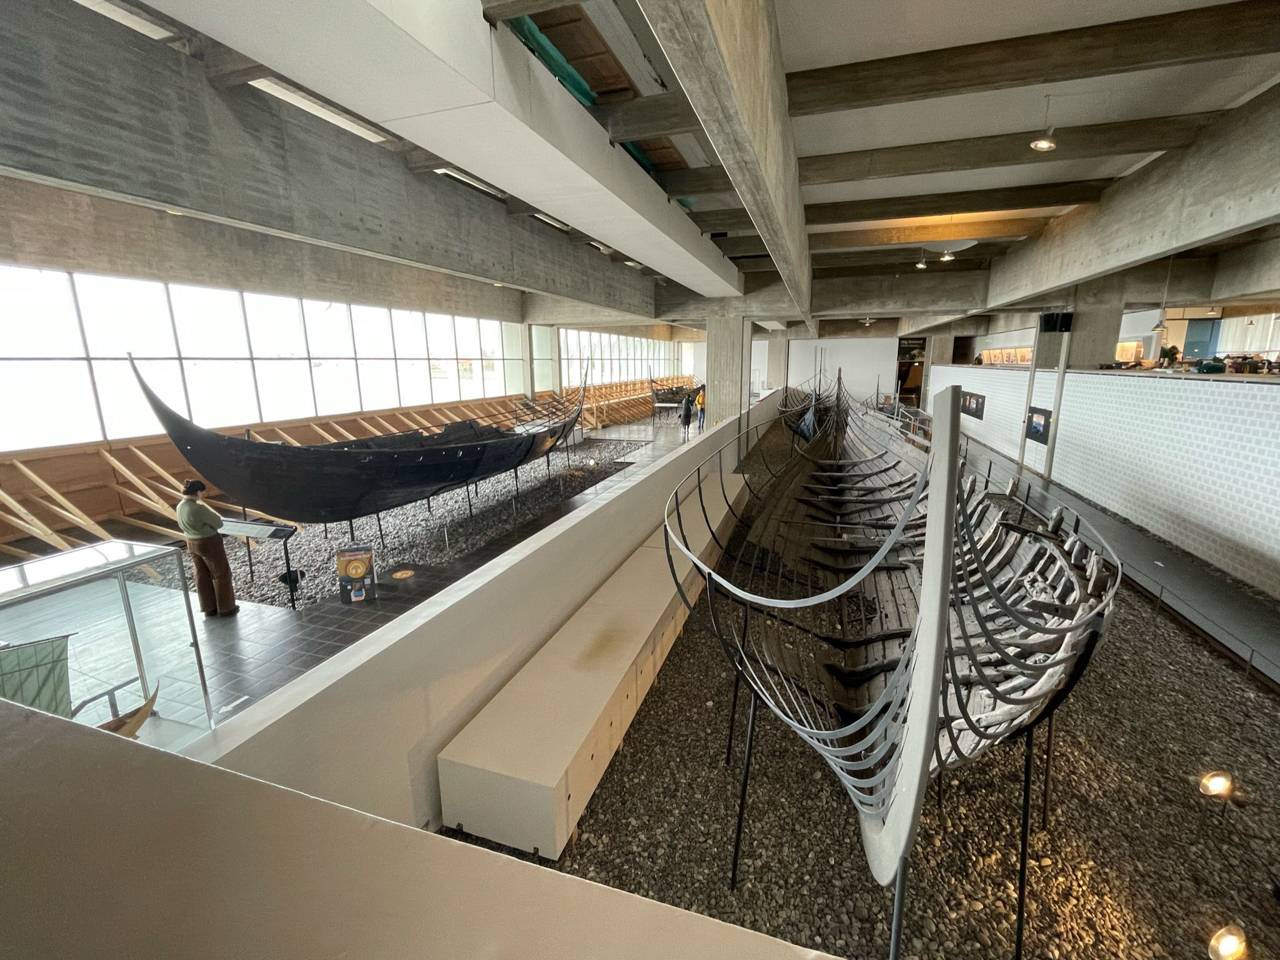 The Viking Ship Museum in Roskilde, Denmark, displays five original Viking ships that were recovered in Roskilde Fjord.